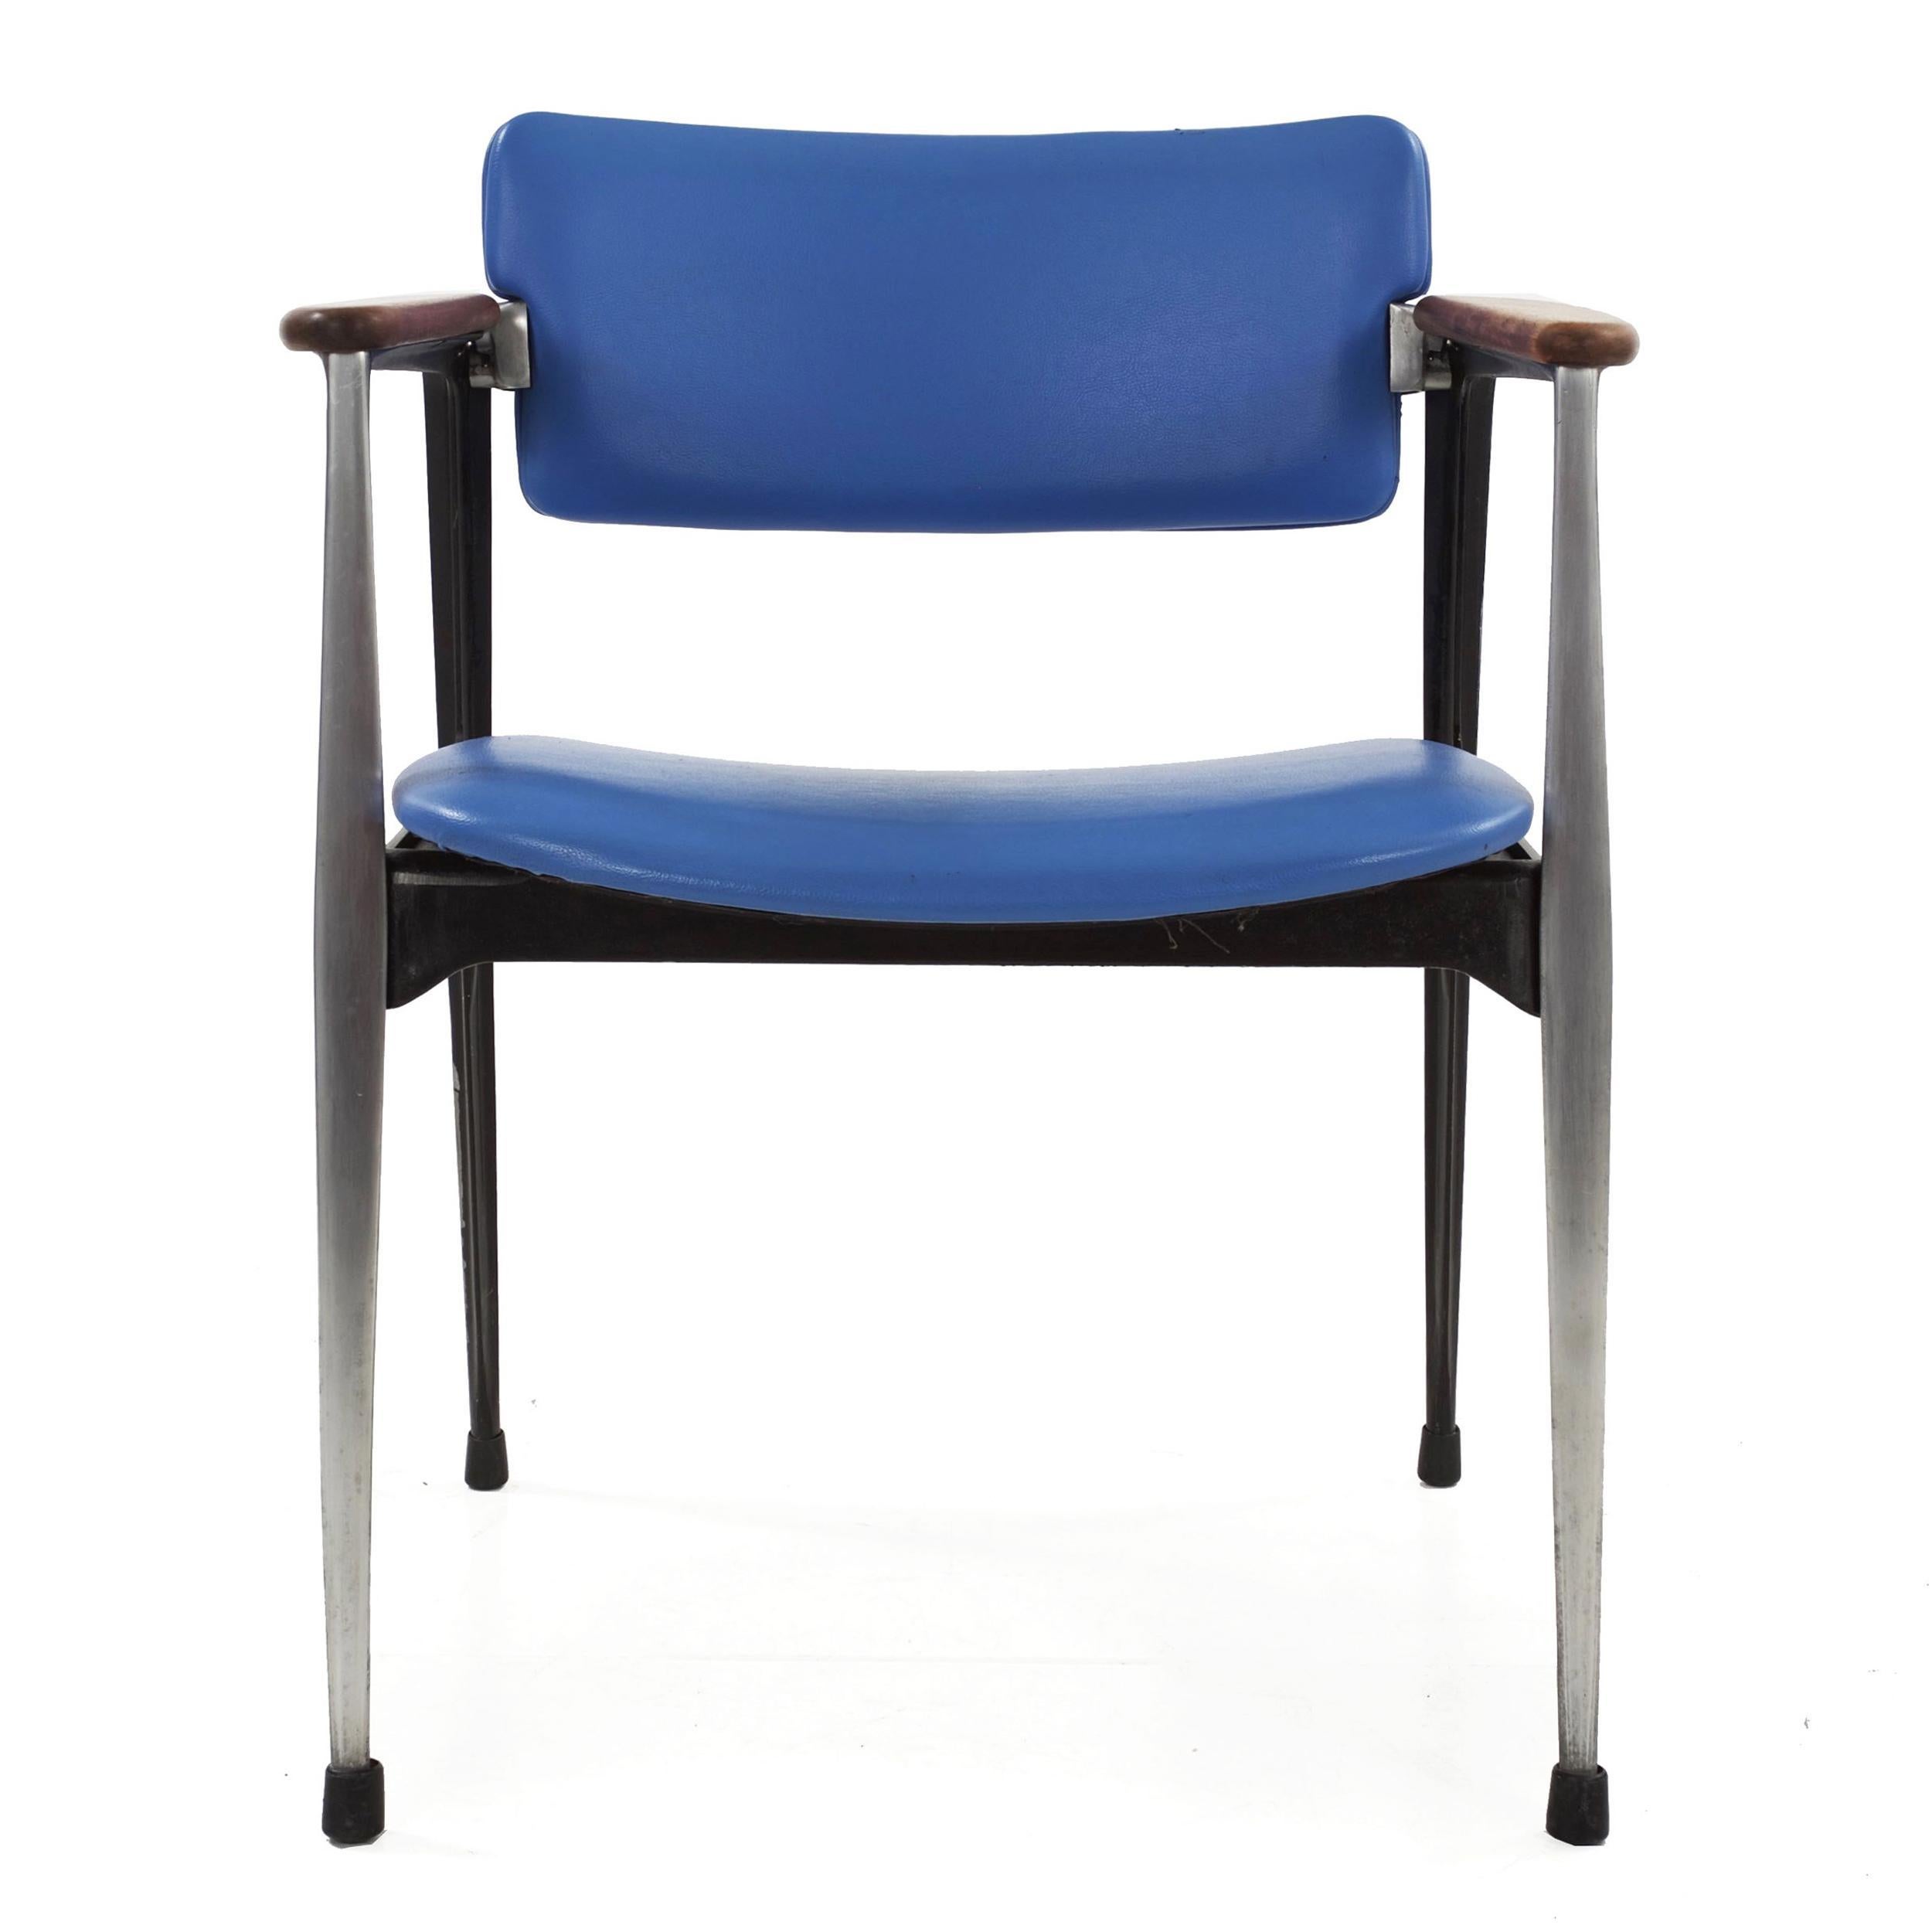 Built to last an eternity, this cast aluminum chair was designed by Dan Johnson for Shelby Williams and still retains the original manufacturer tag from Crucible Products. It retains the original light blue leatherette, which though worn still